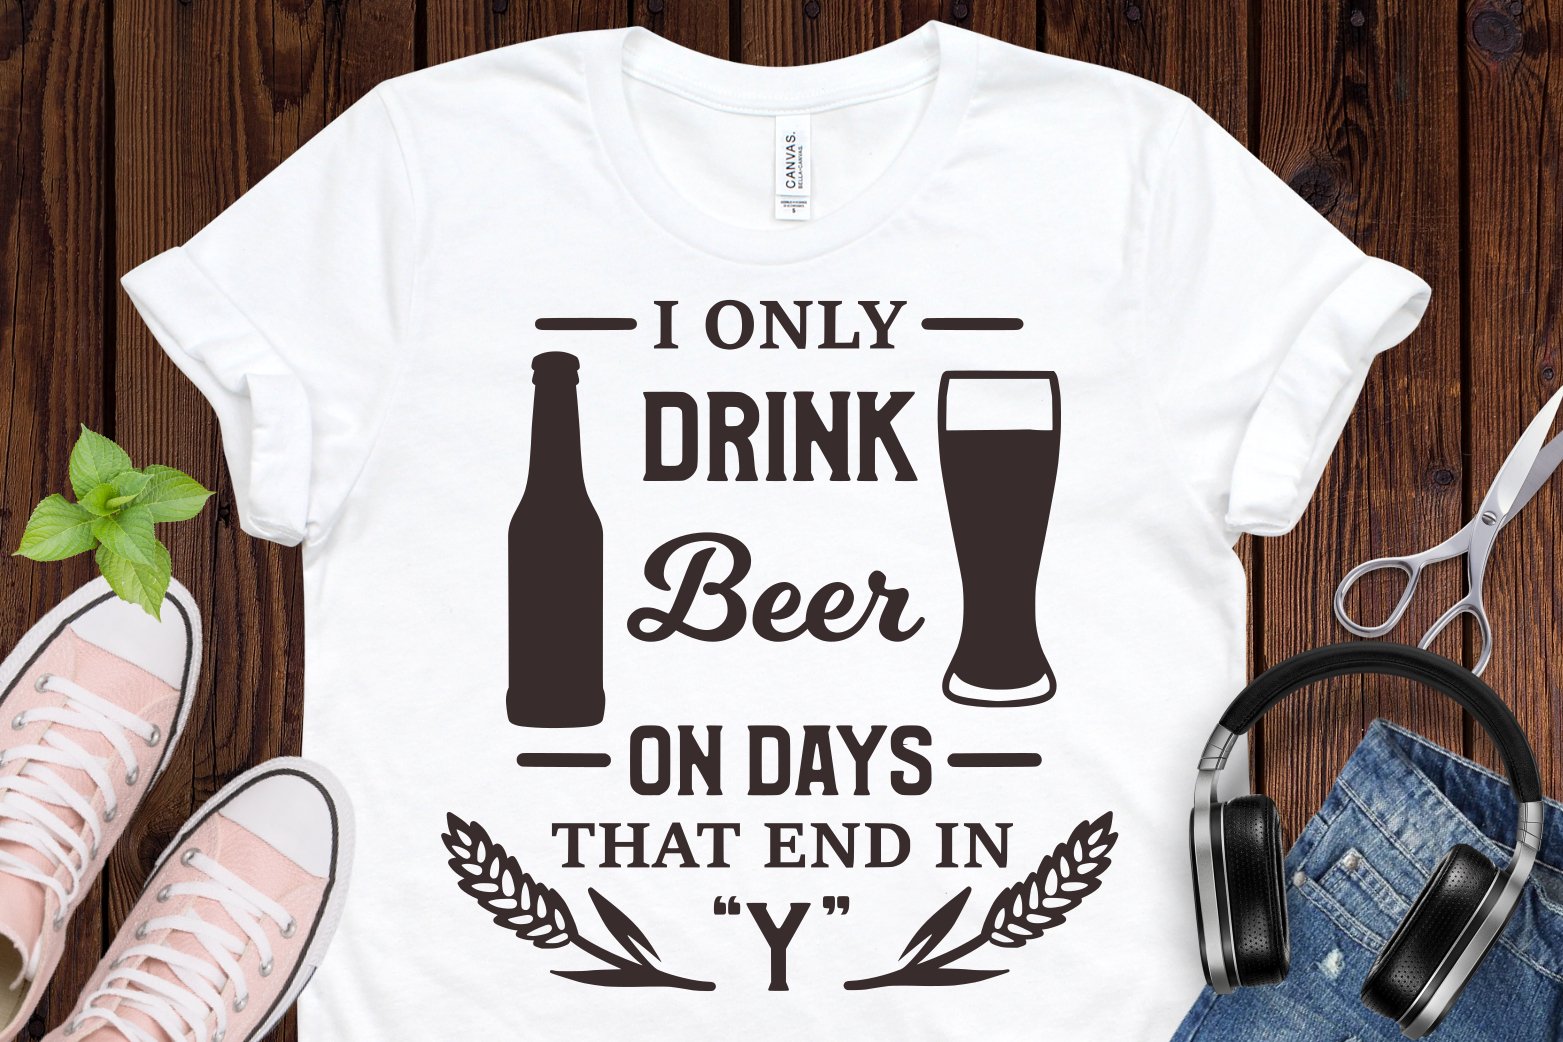 Classic white t-shirt with phrase about beer.